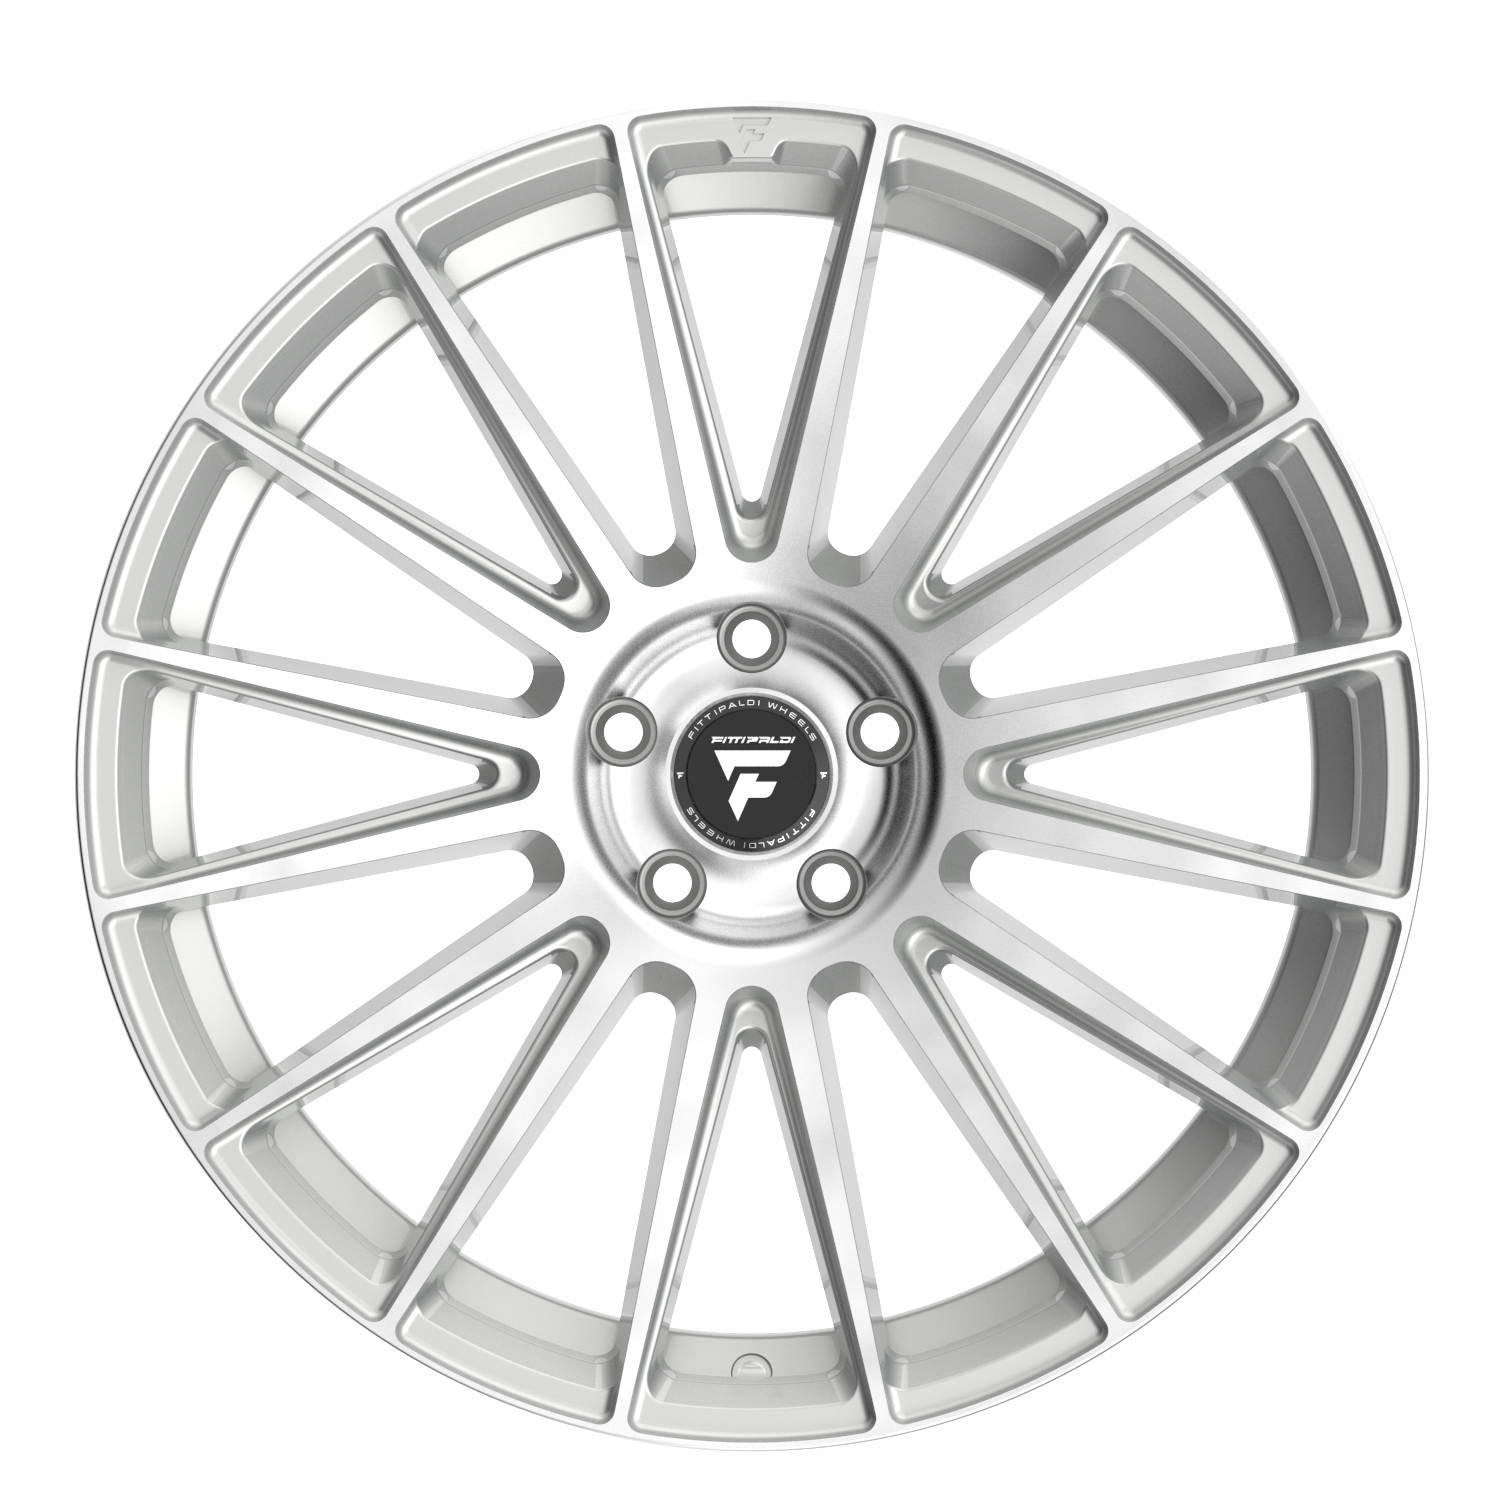 FITTIPALDI 363BS 20X9.5 +38 5X120 Brushed Silver